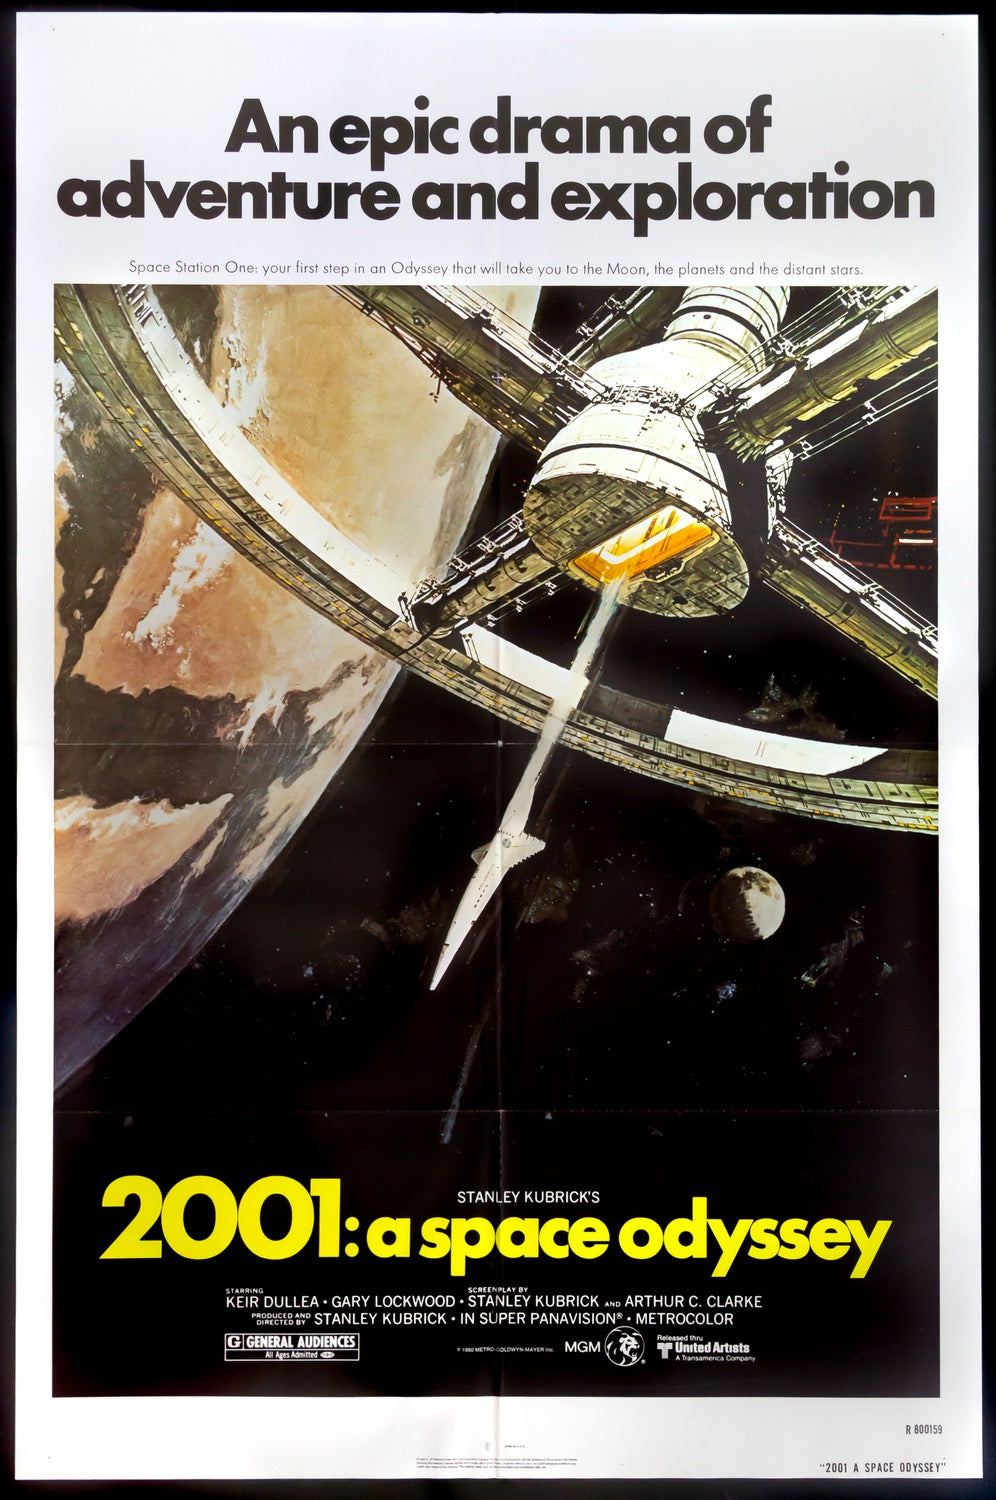 2001: A SPACE ODYSSEY (1968) POSTER, US, Original Film Posters Online, Collectibles